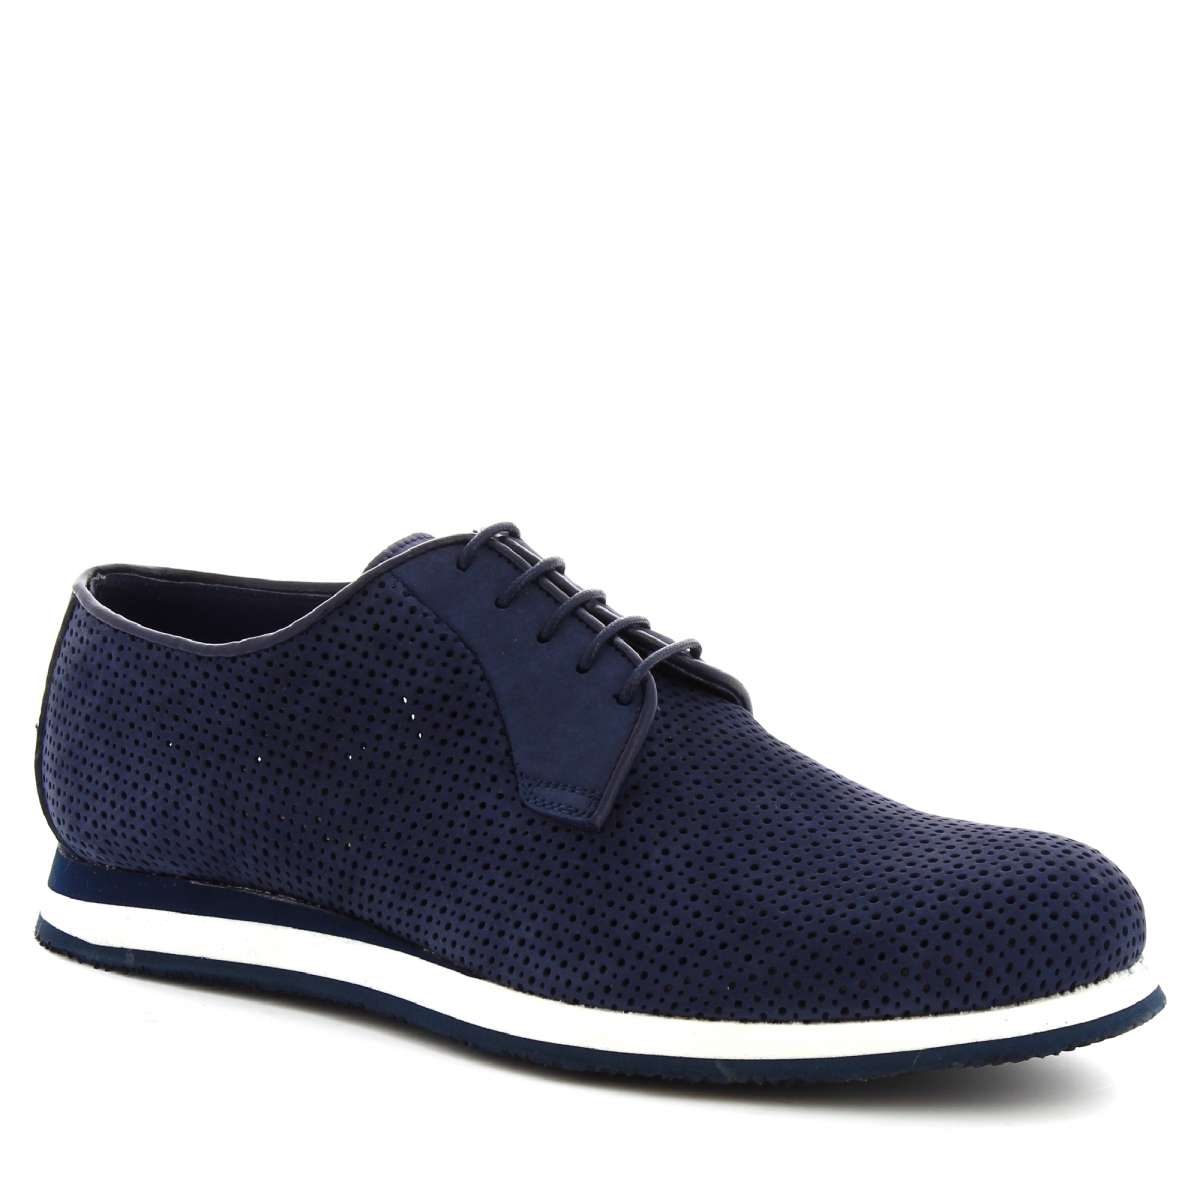 Handmade men's casual shoes in perforated blue suede and calf leather